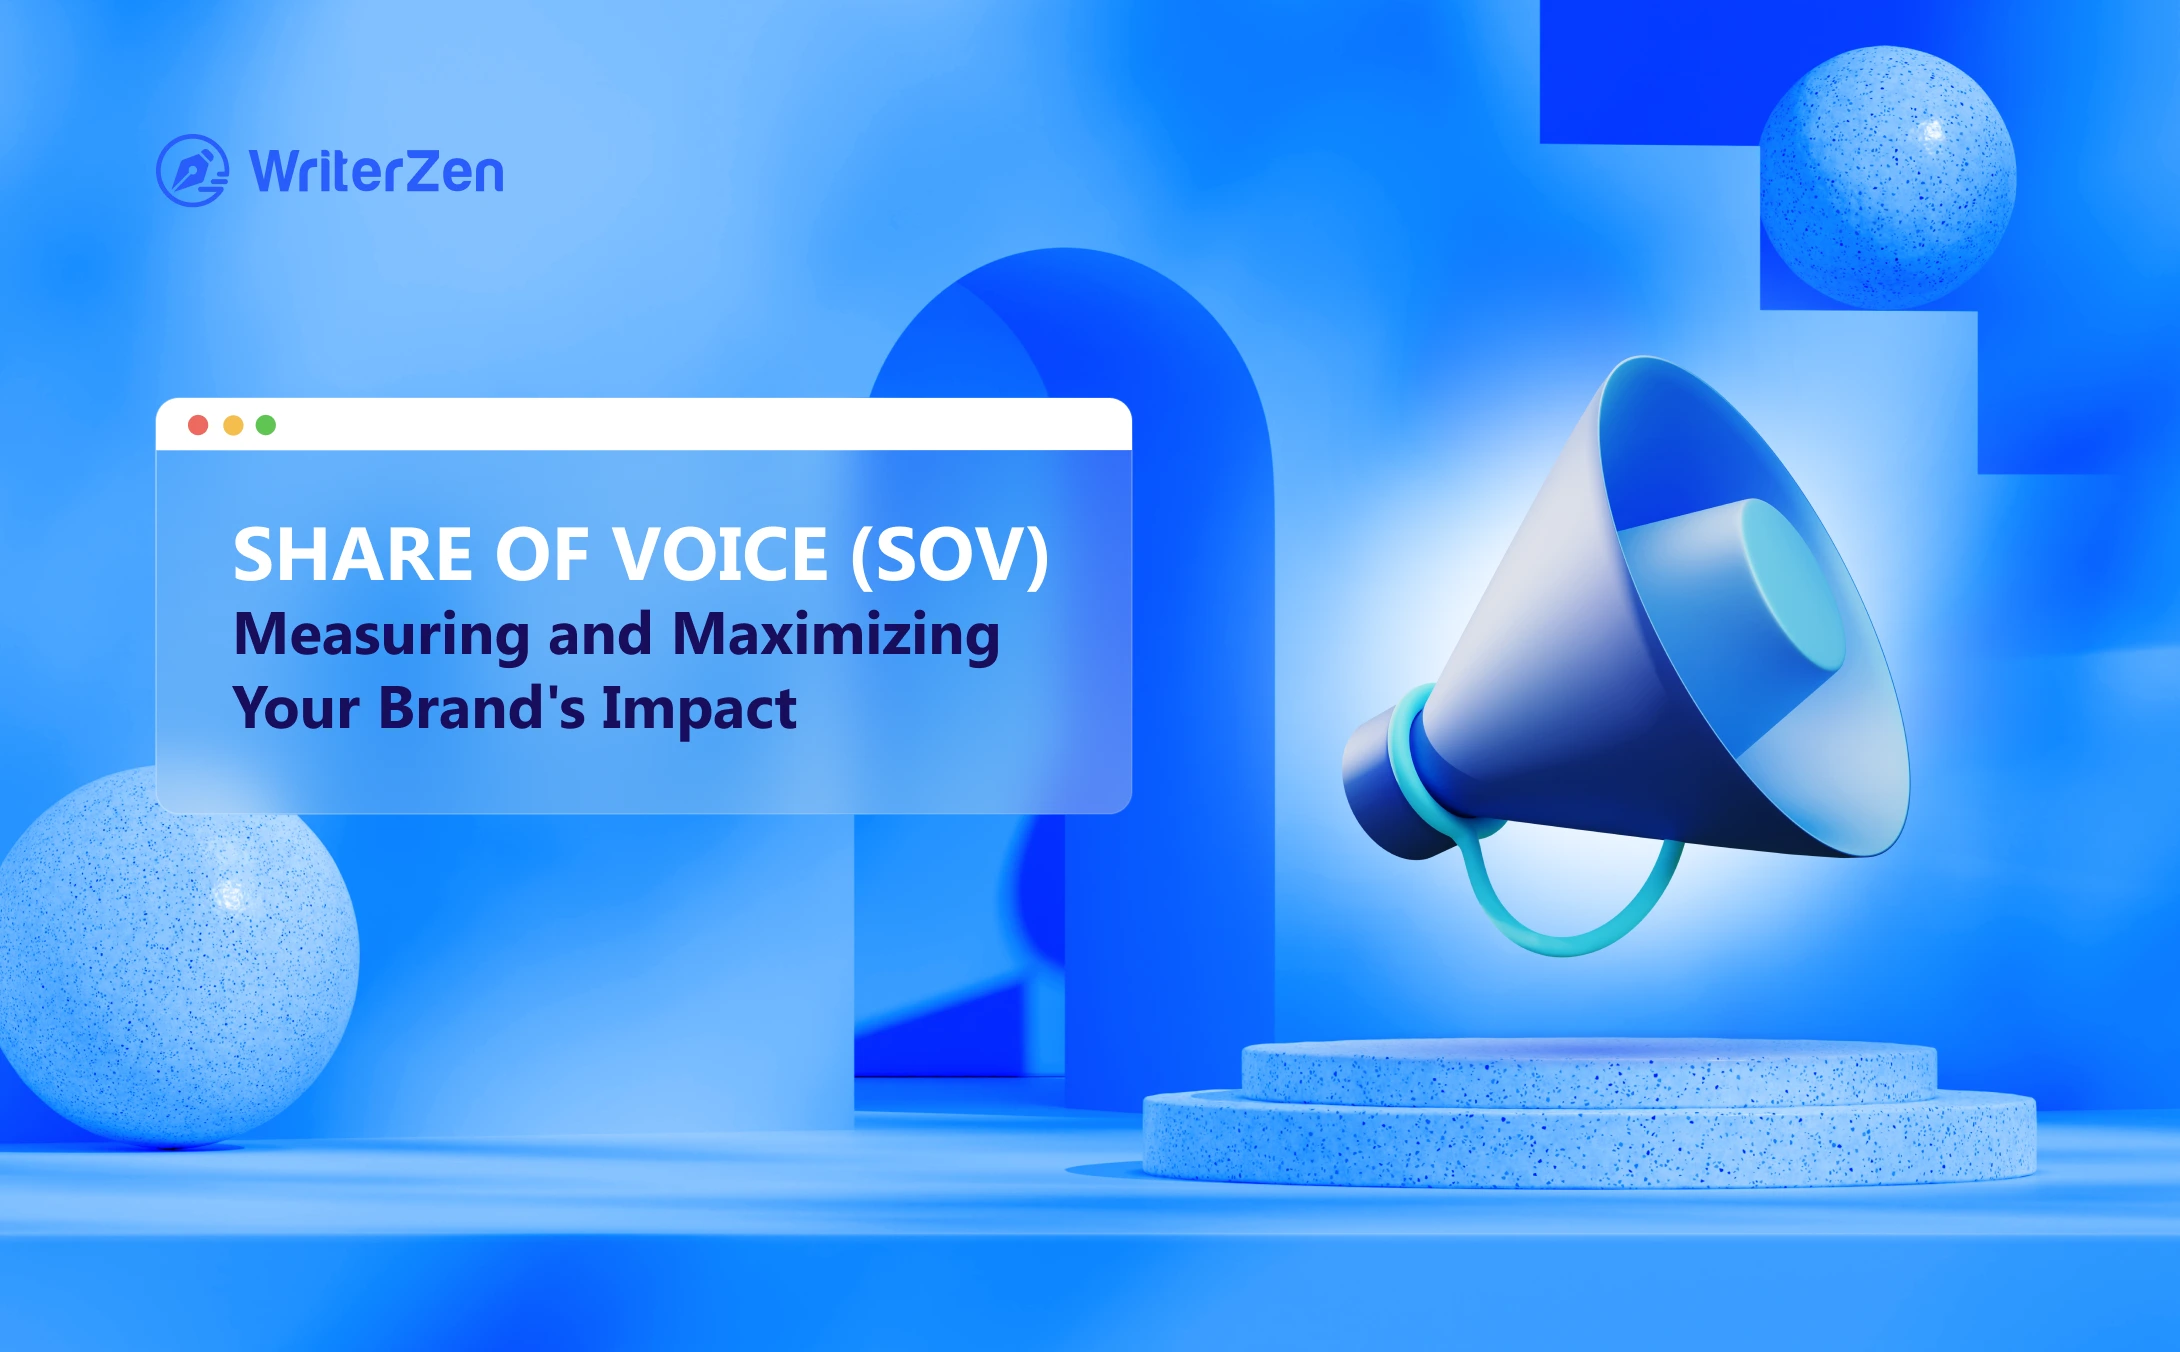 Share of Voice (SOV): Measuring and Maximizing Your Brand's Impact